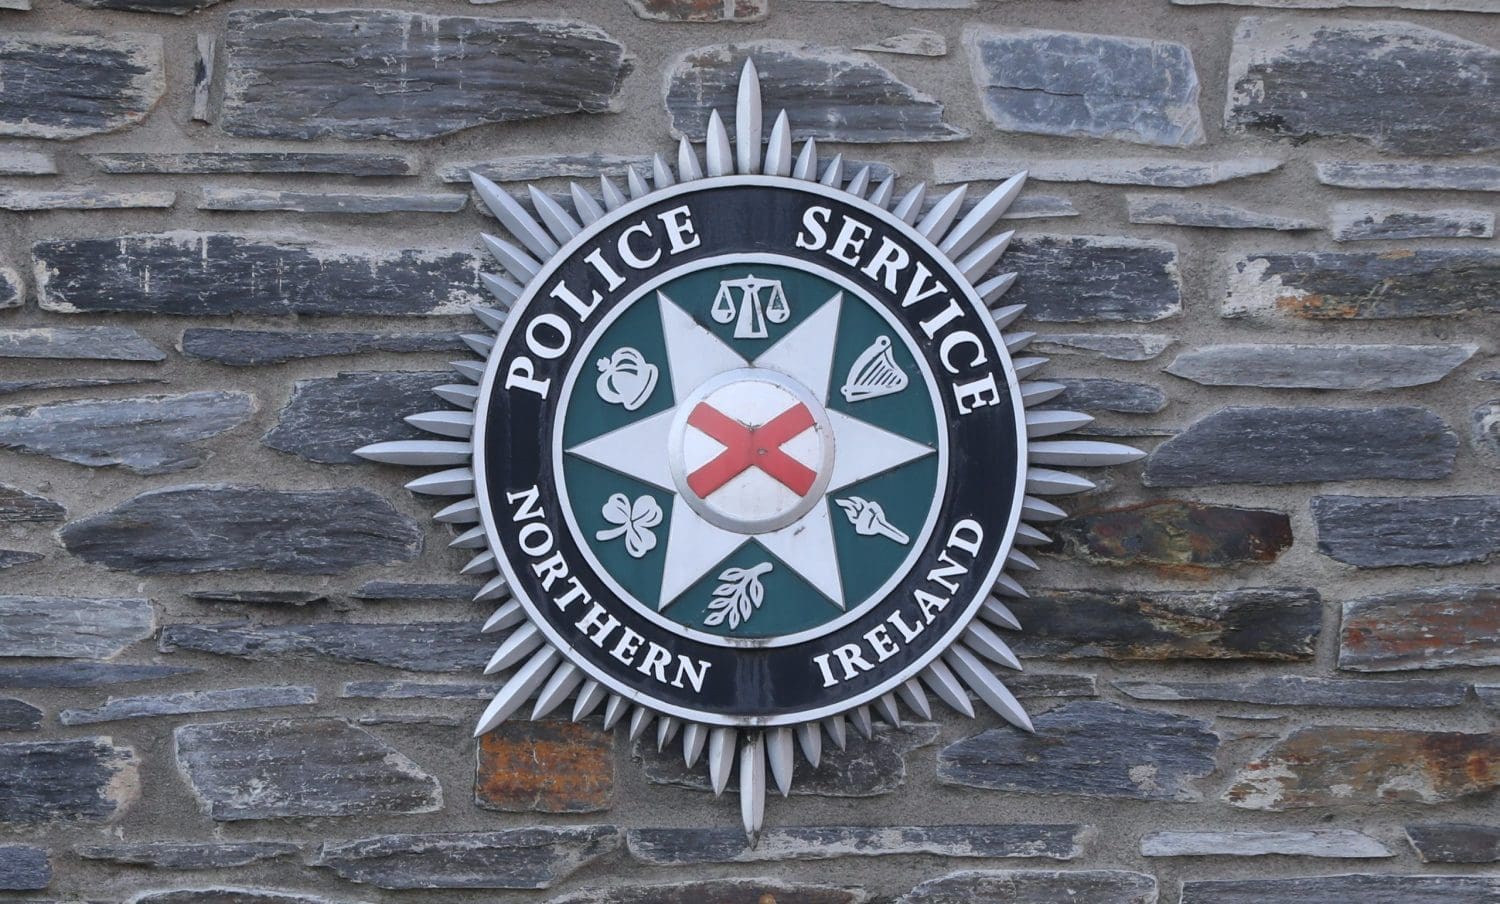 A sign of the Police Service of Northern Ireland